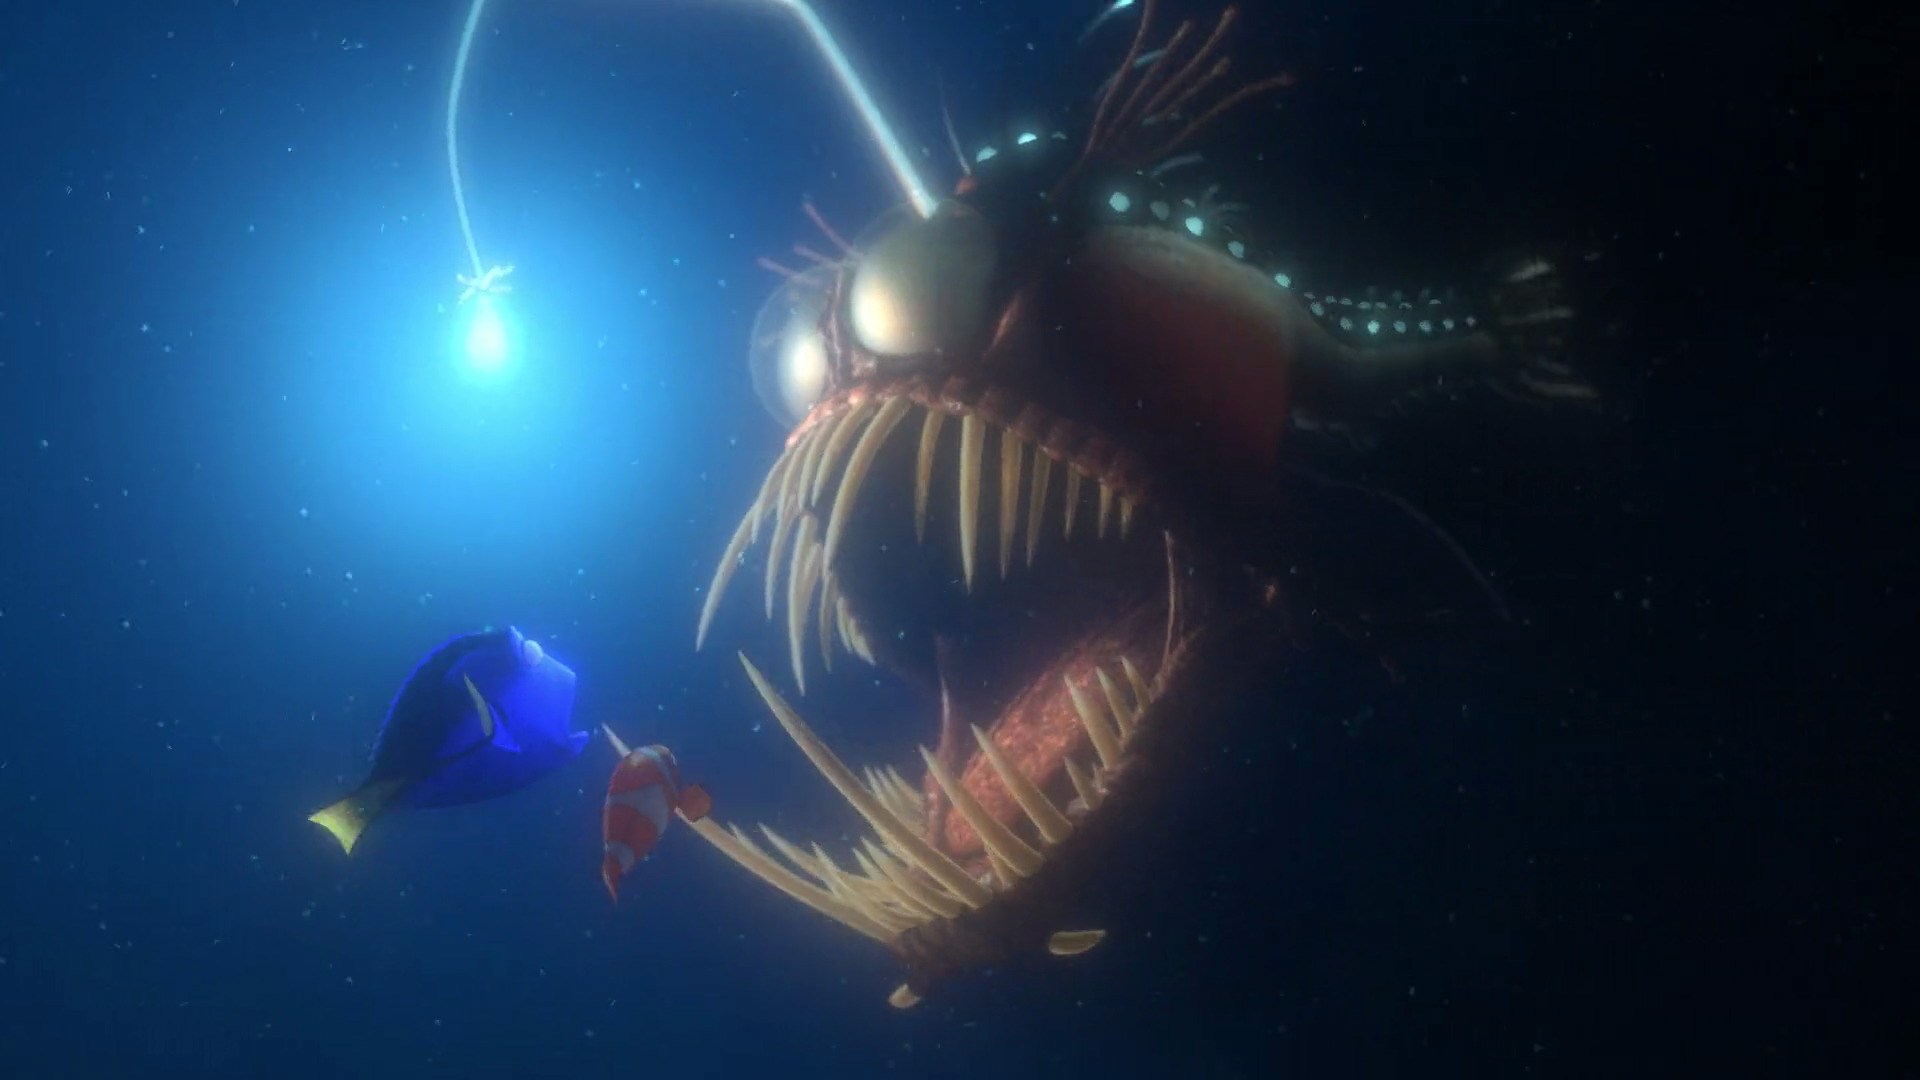 How big is the anglerfish in Finding Nemo?